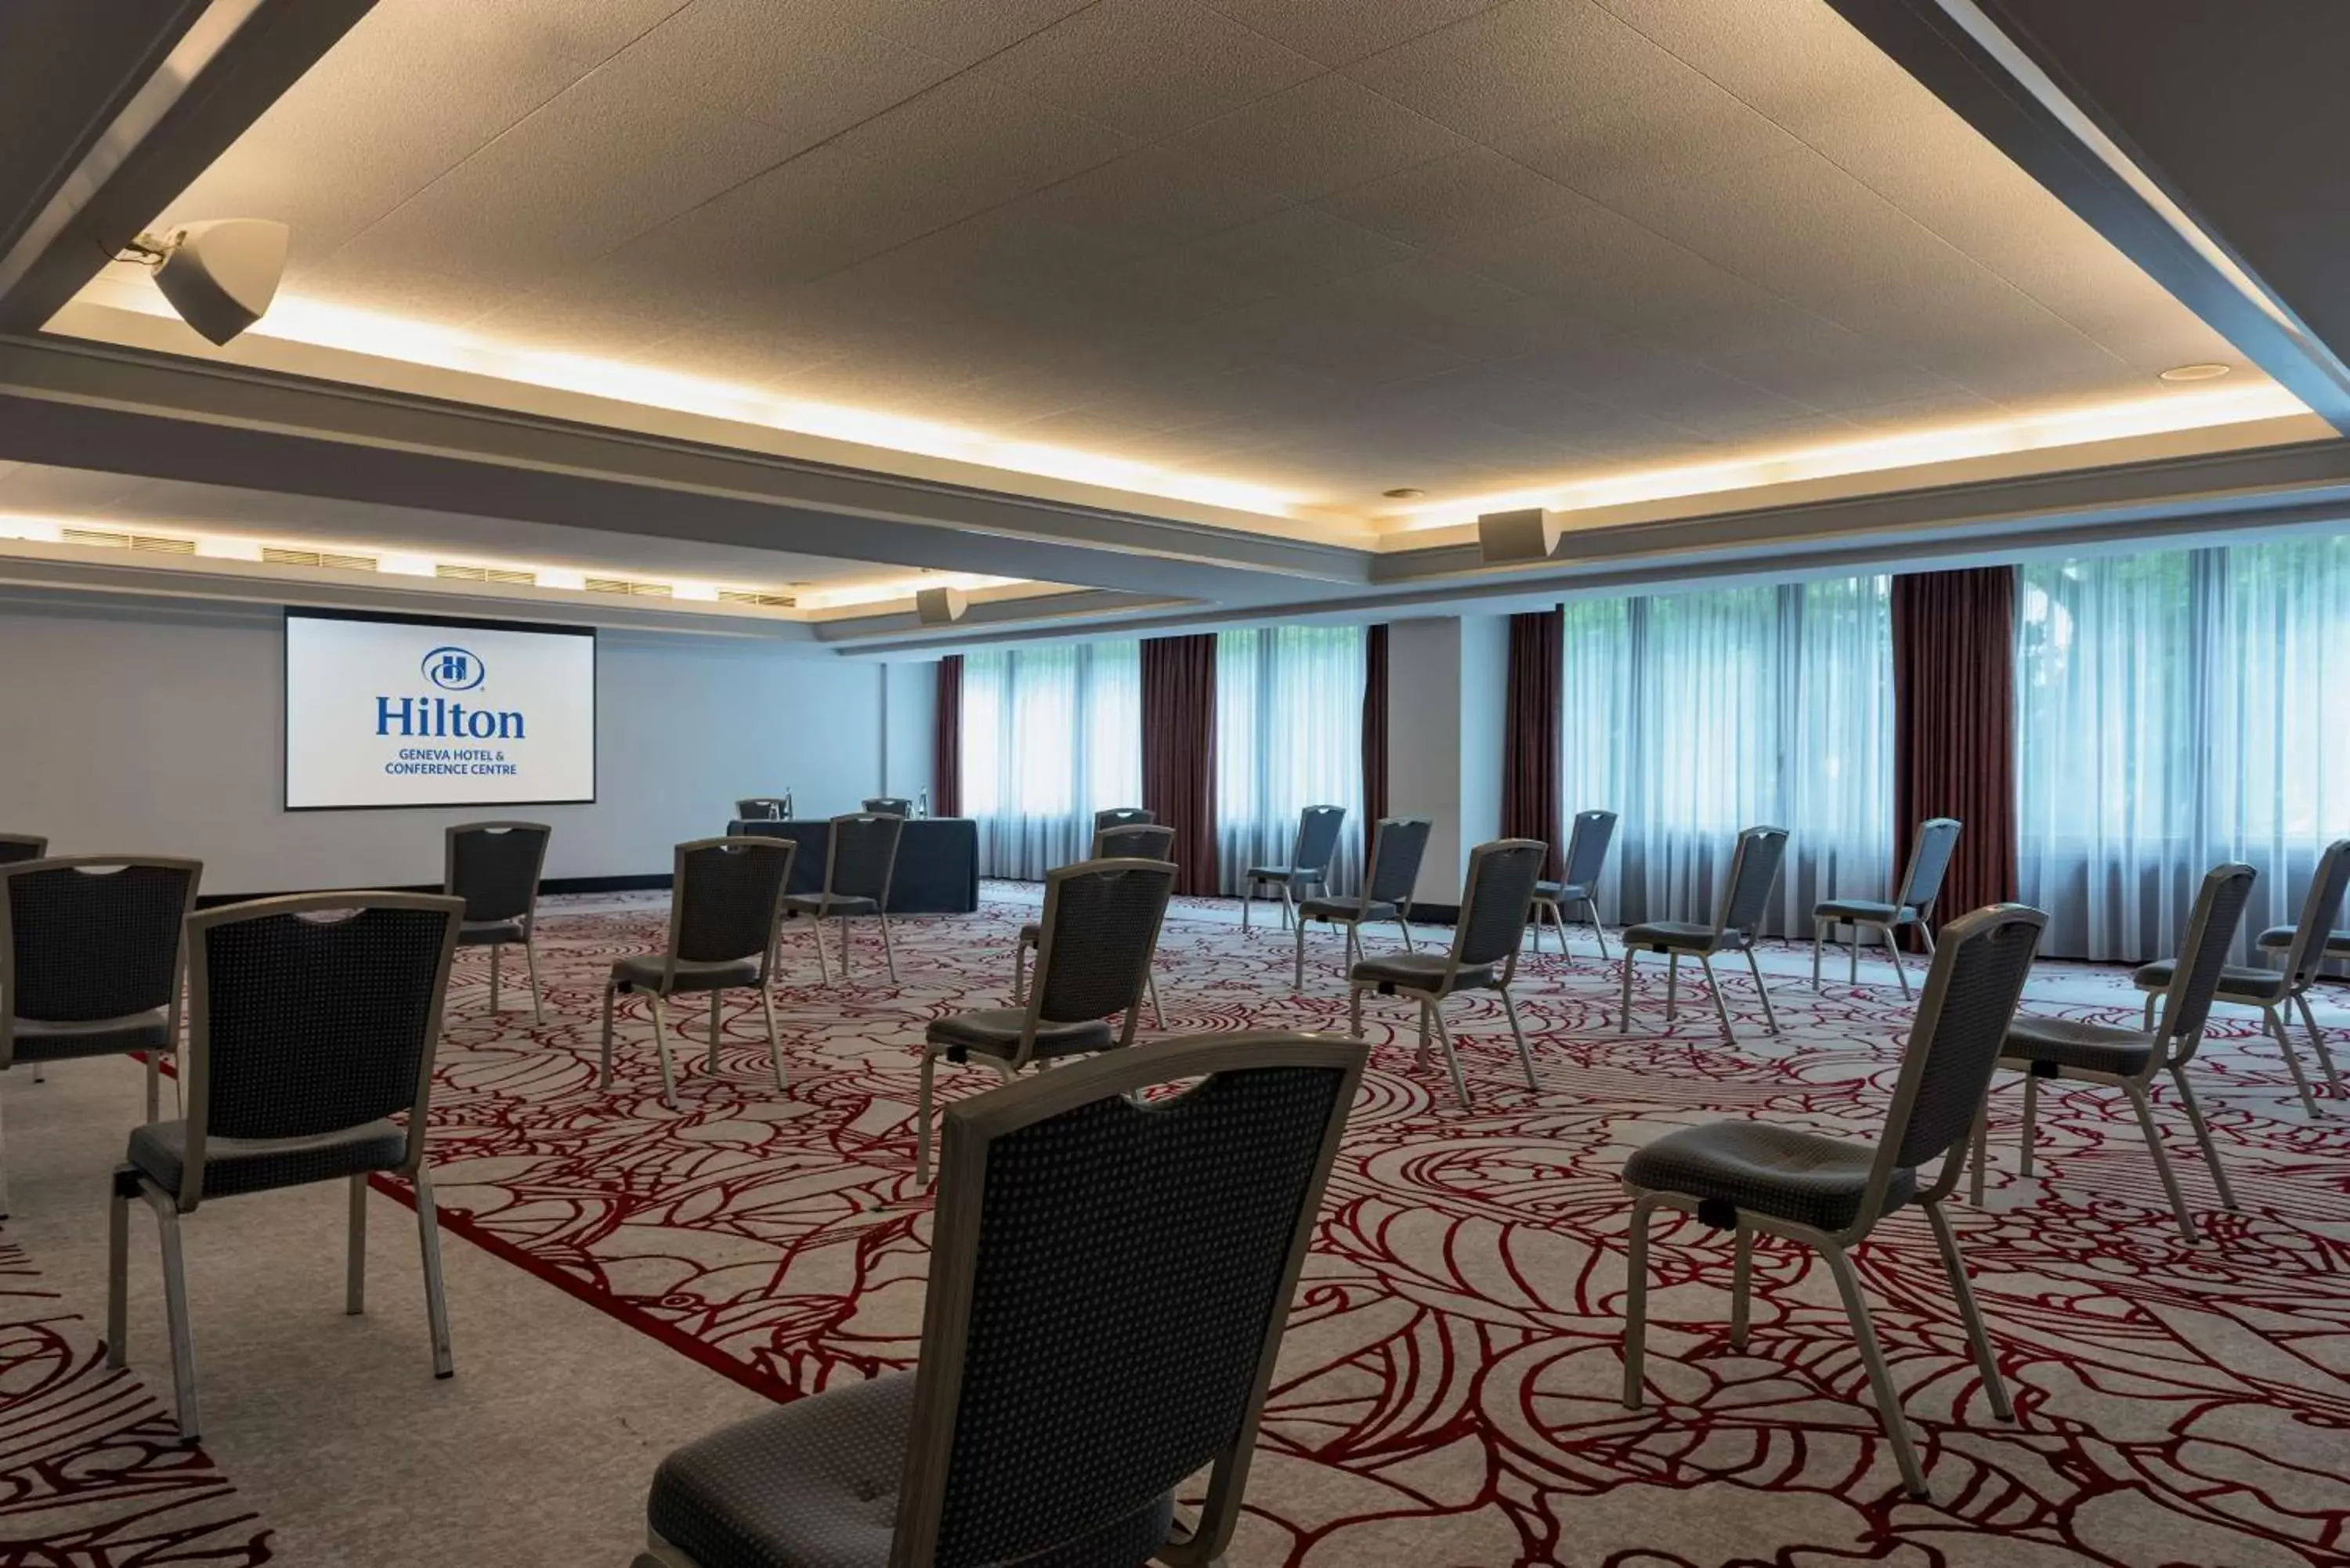 Meeting/conference room in Hilton Geneva Hotel and Conference Centre